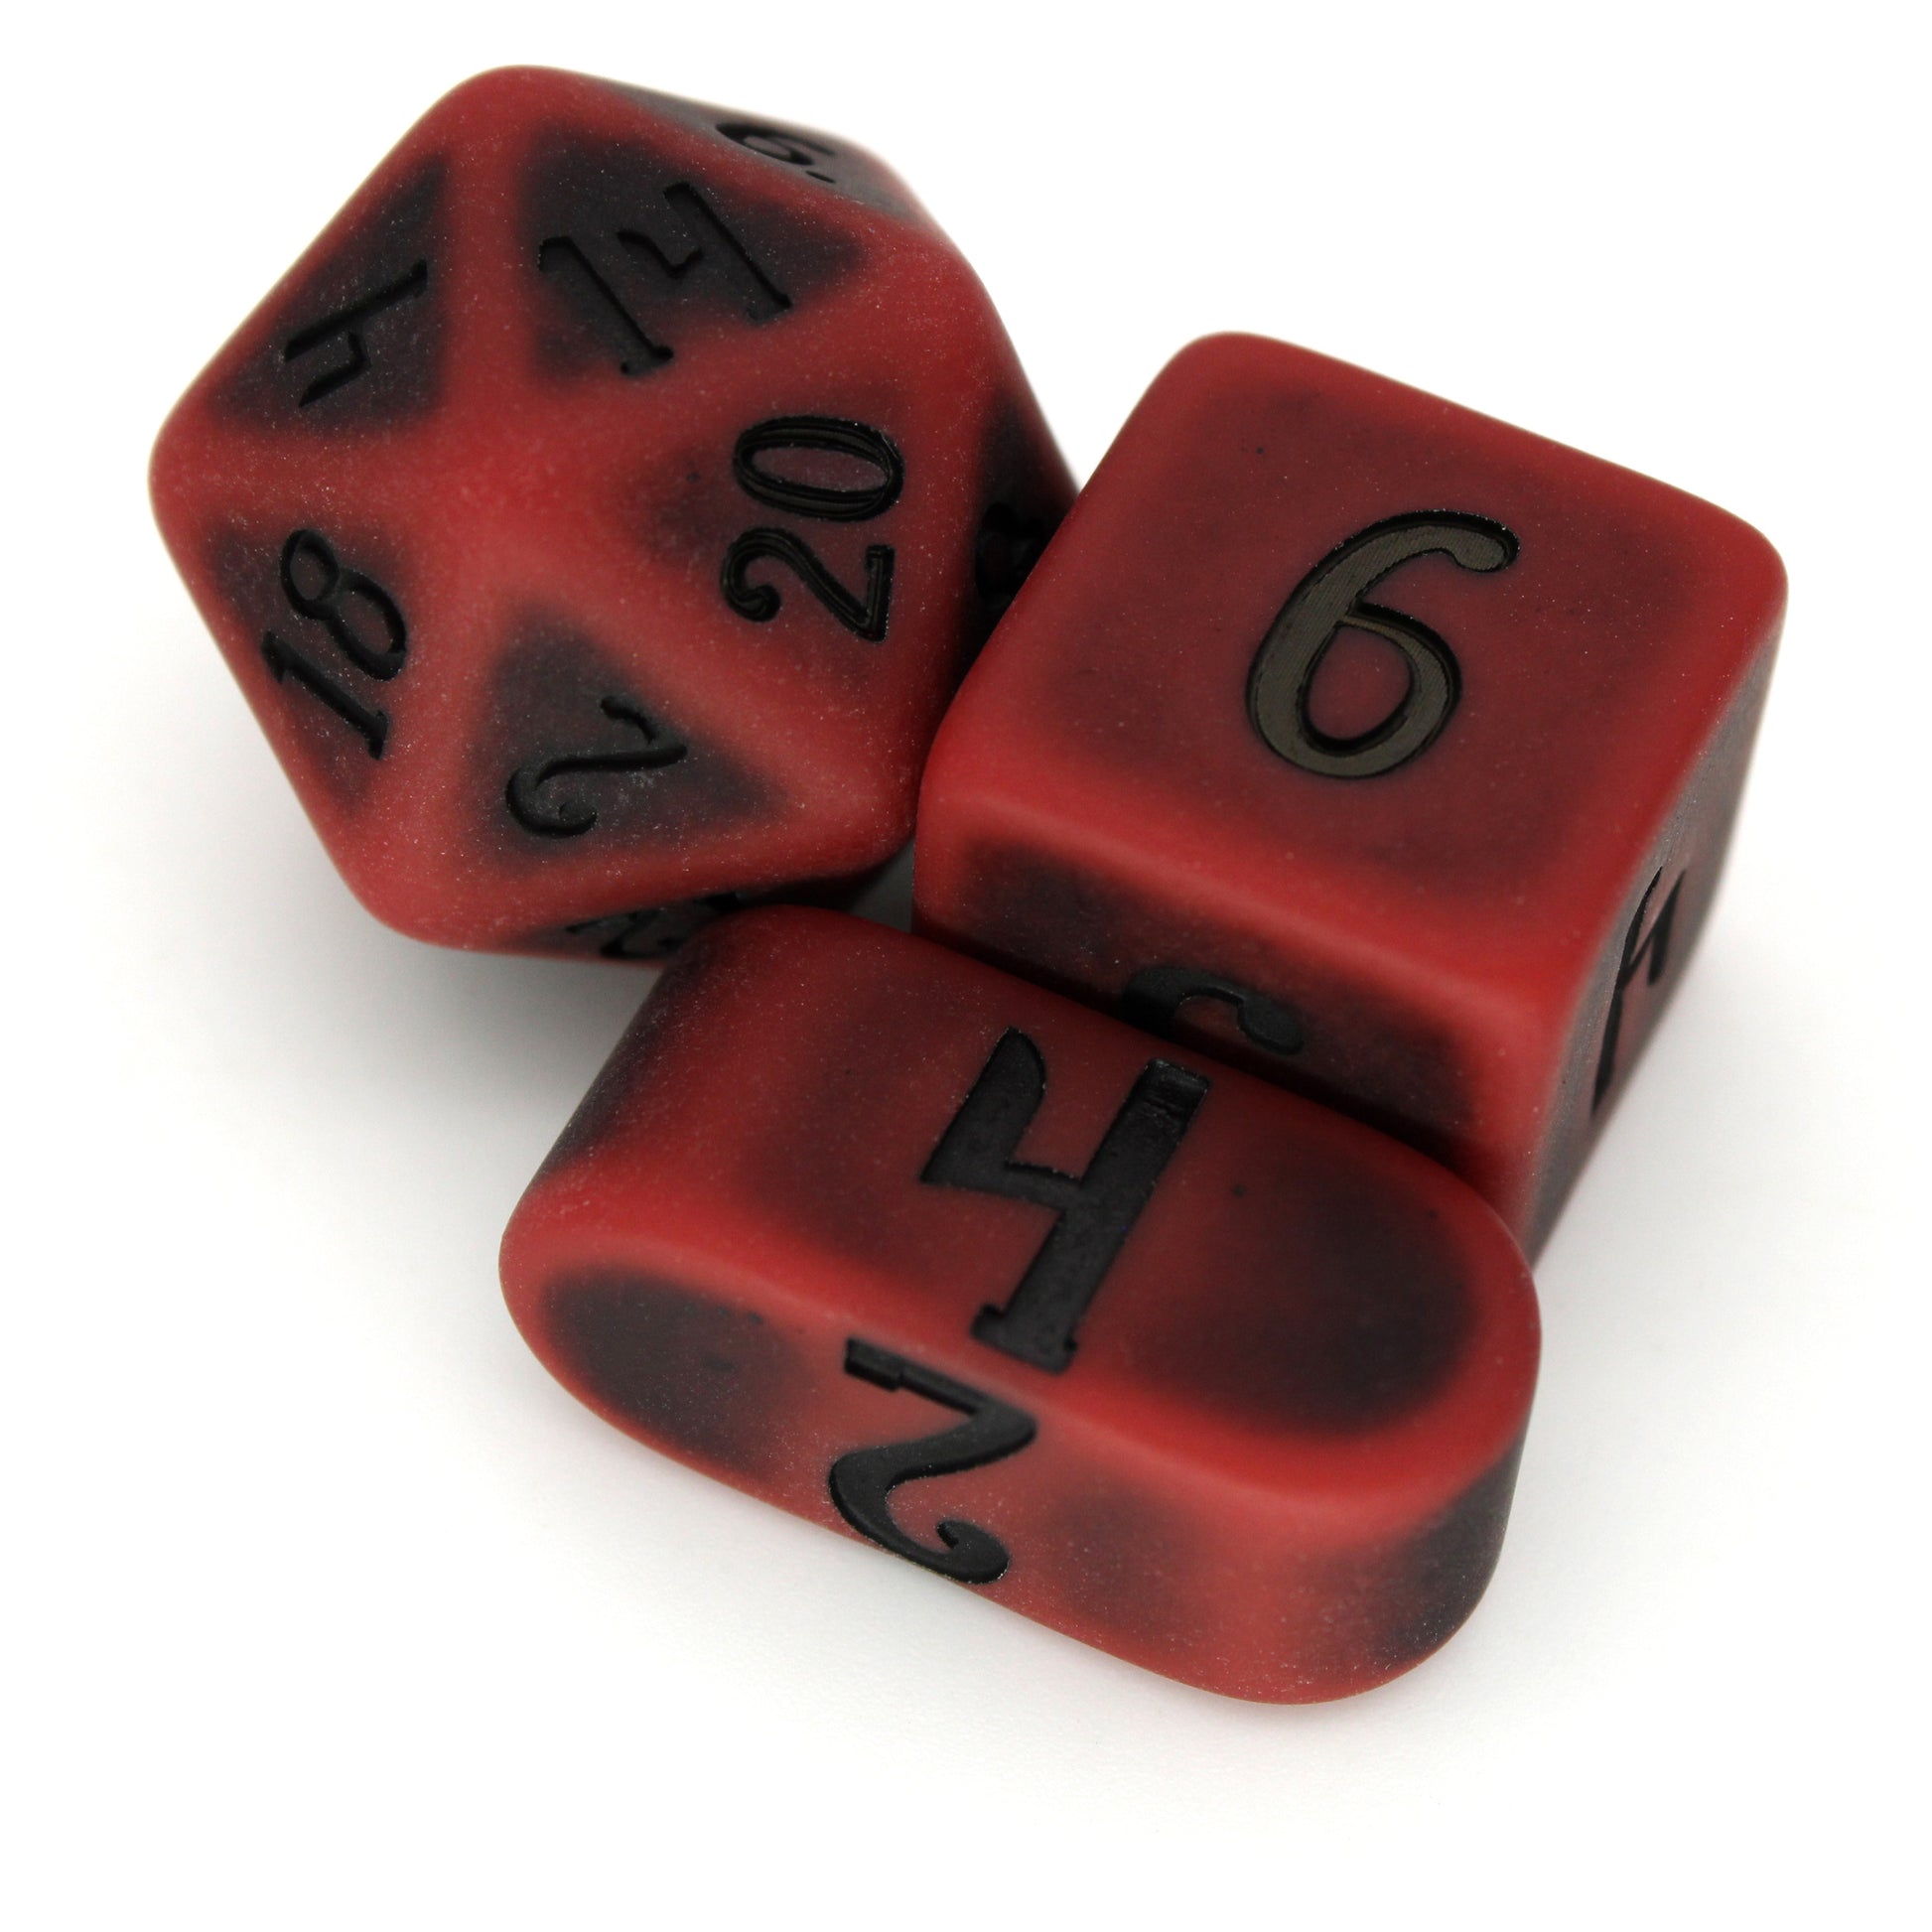 Orc Blood is a 10-piece, hemophiliac-scarlet, resin dice set with a matte finish and darkened center pattern, inked in black.